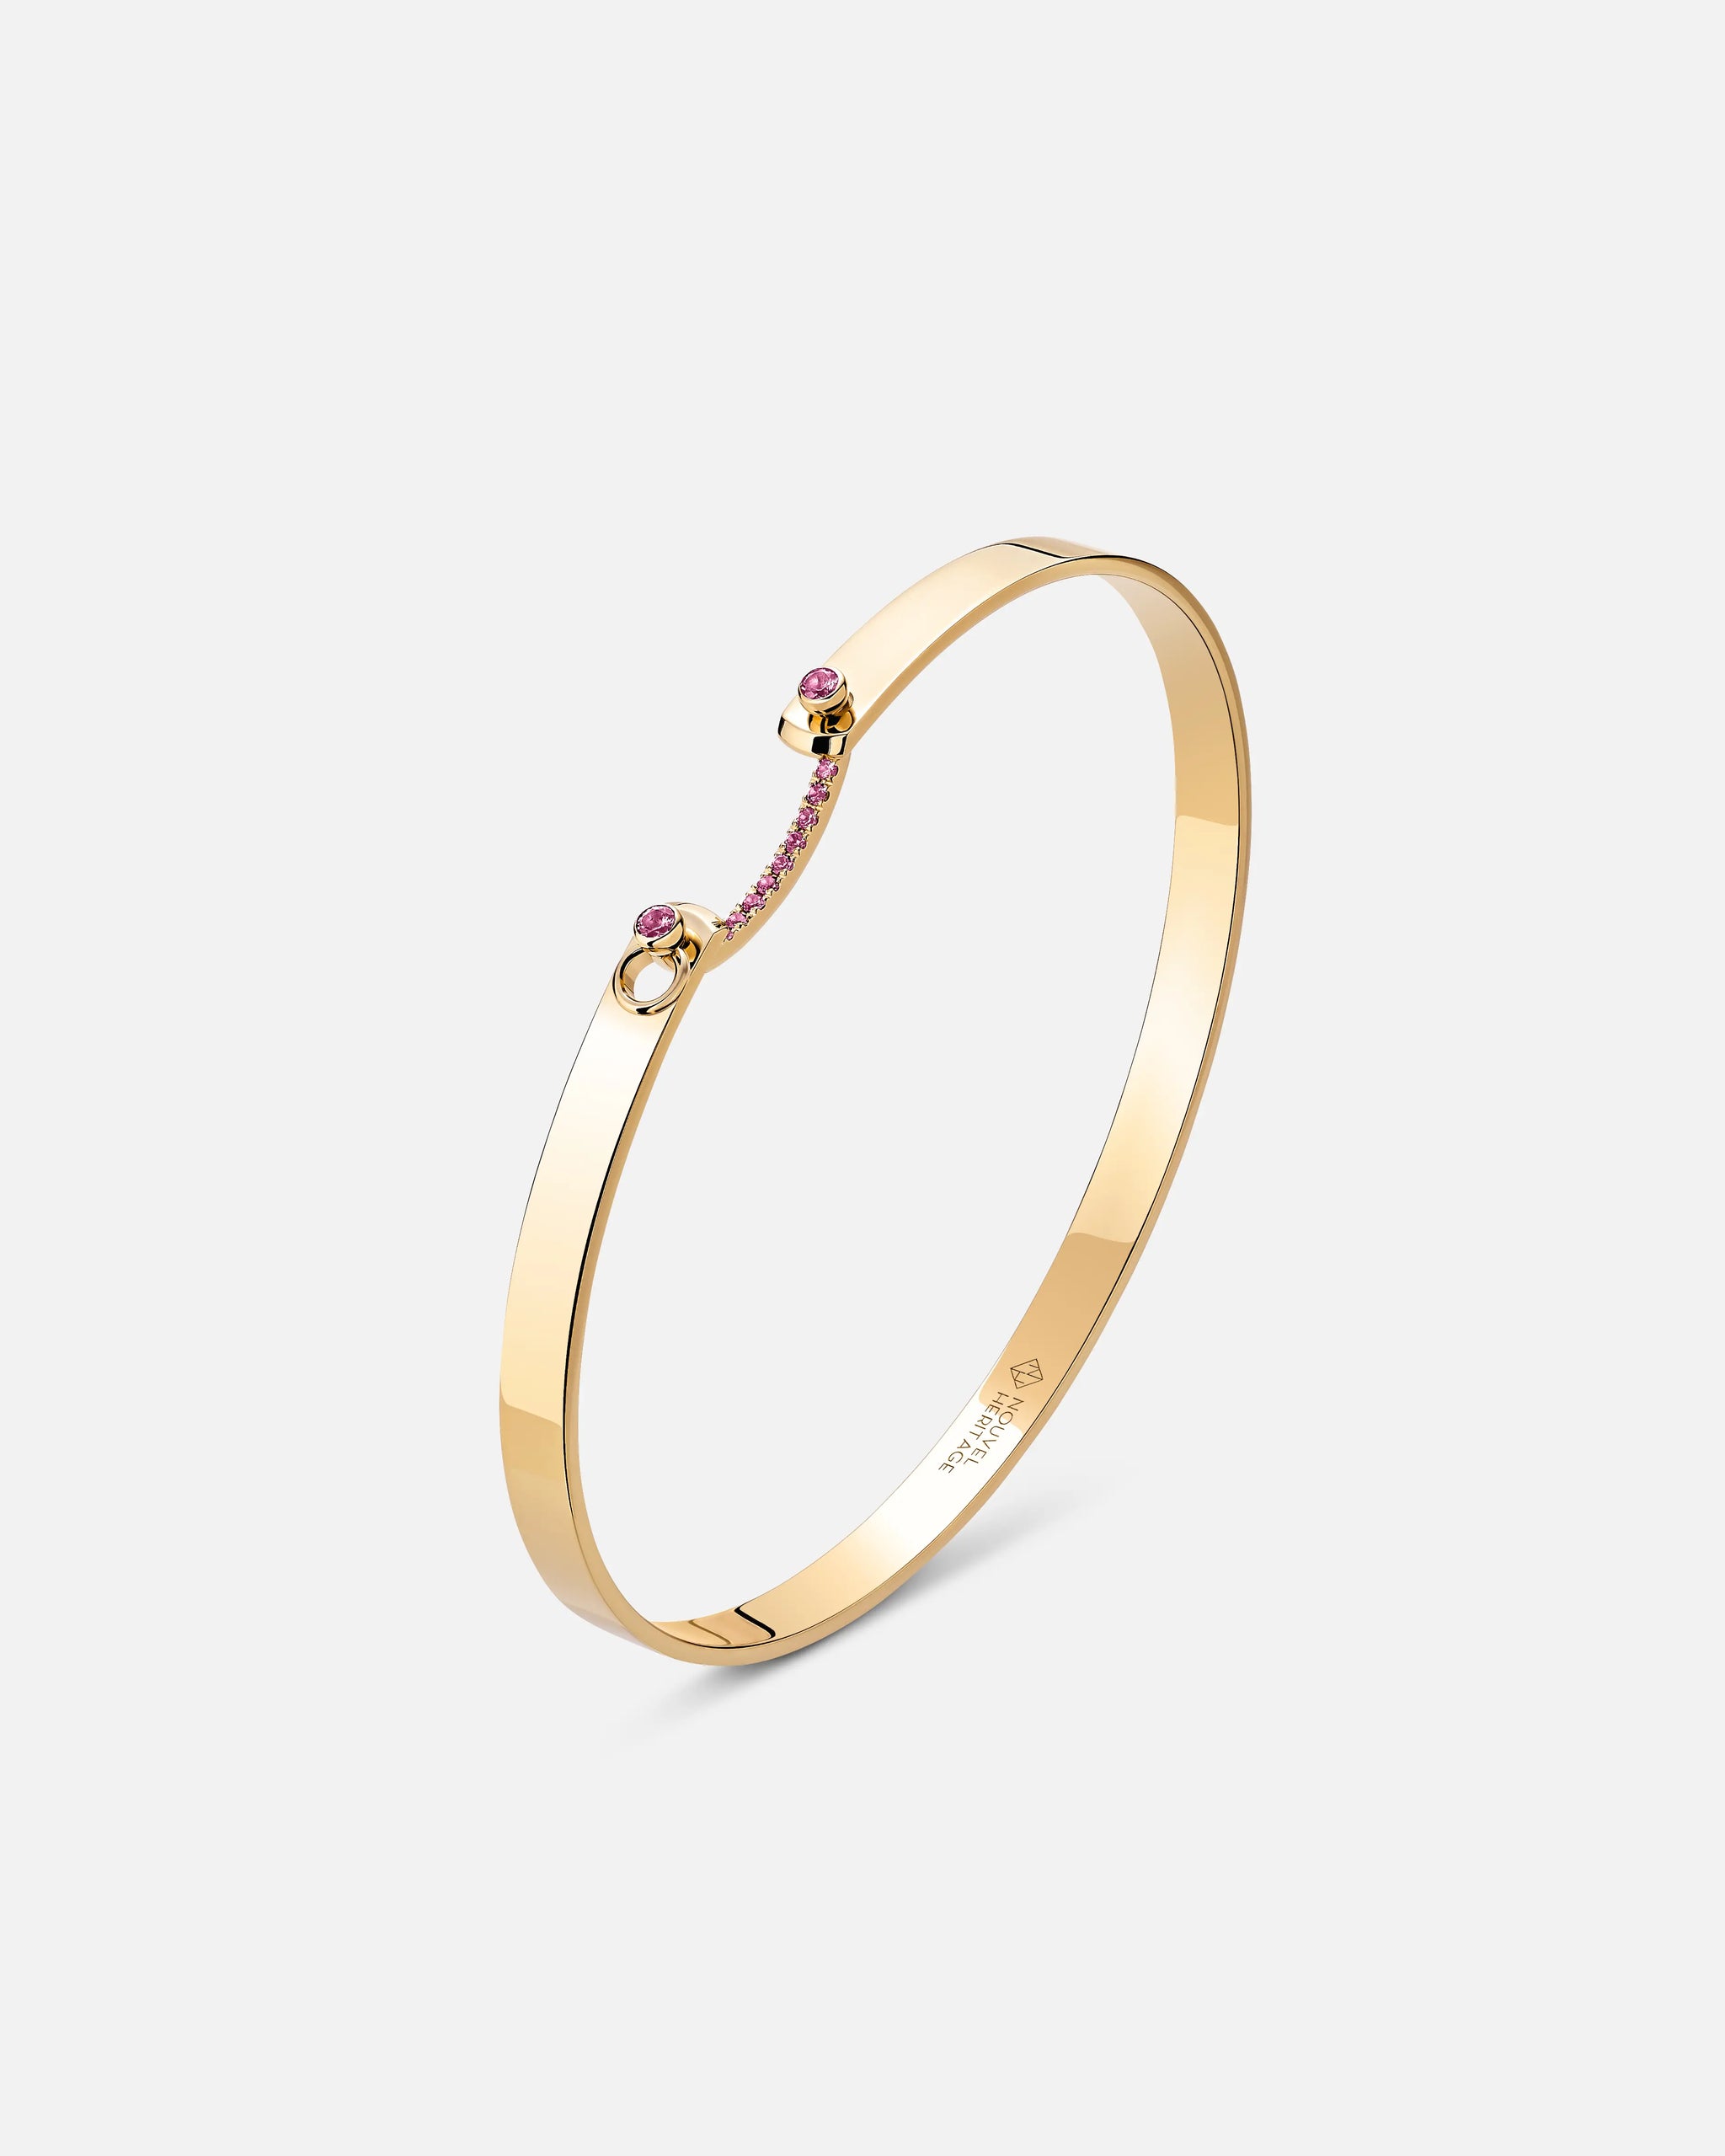 Baby Pink Mood Bangle in Yellow Gold - 1 - Nouvel Heritage